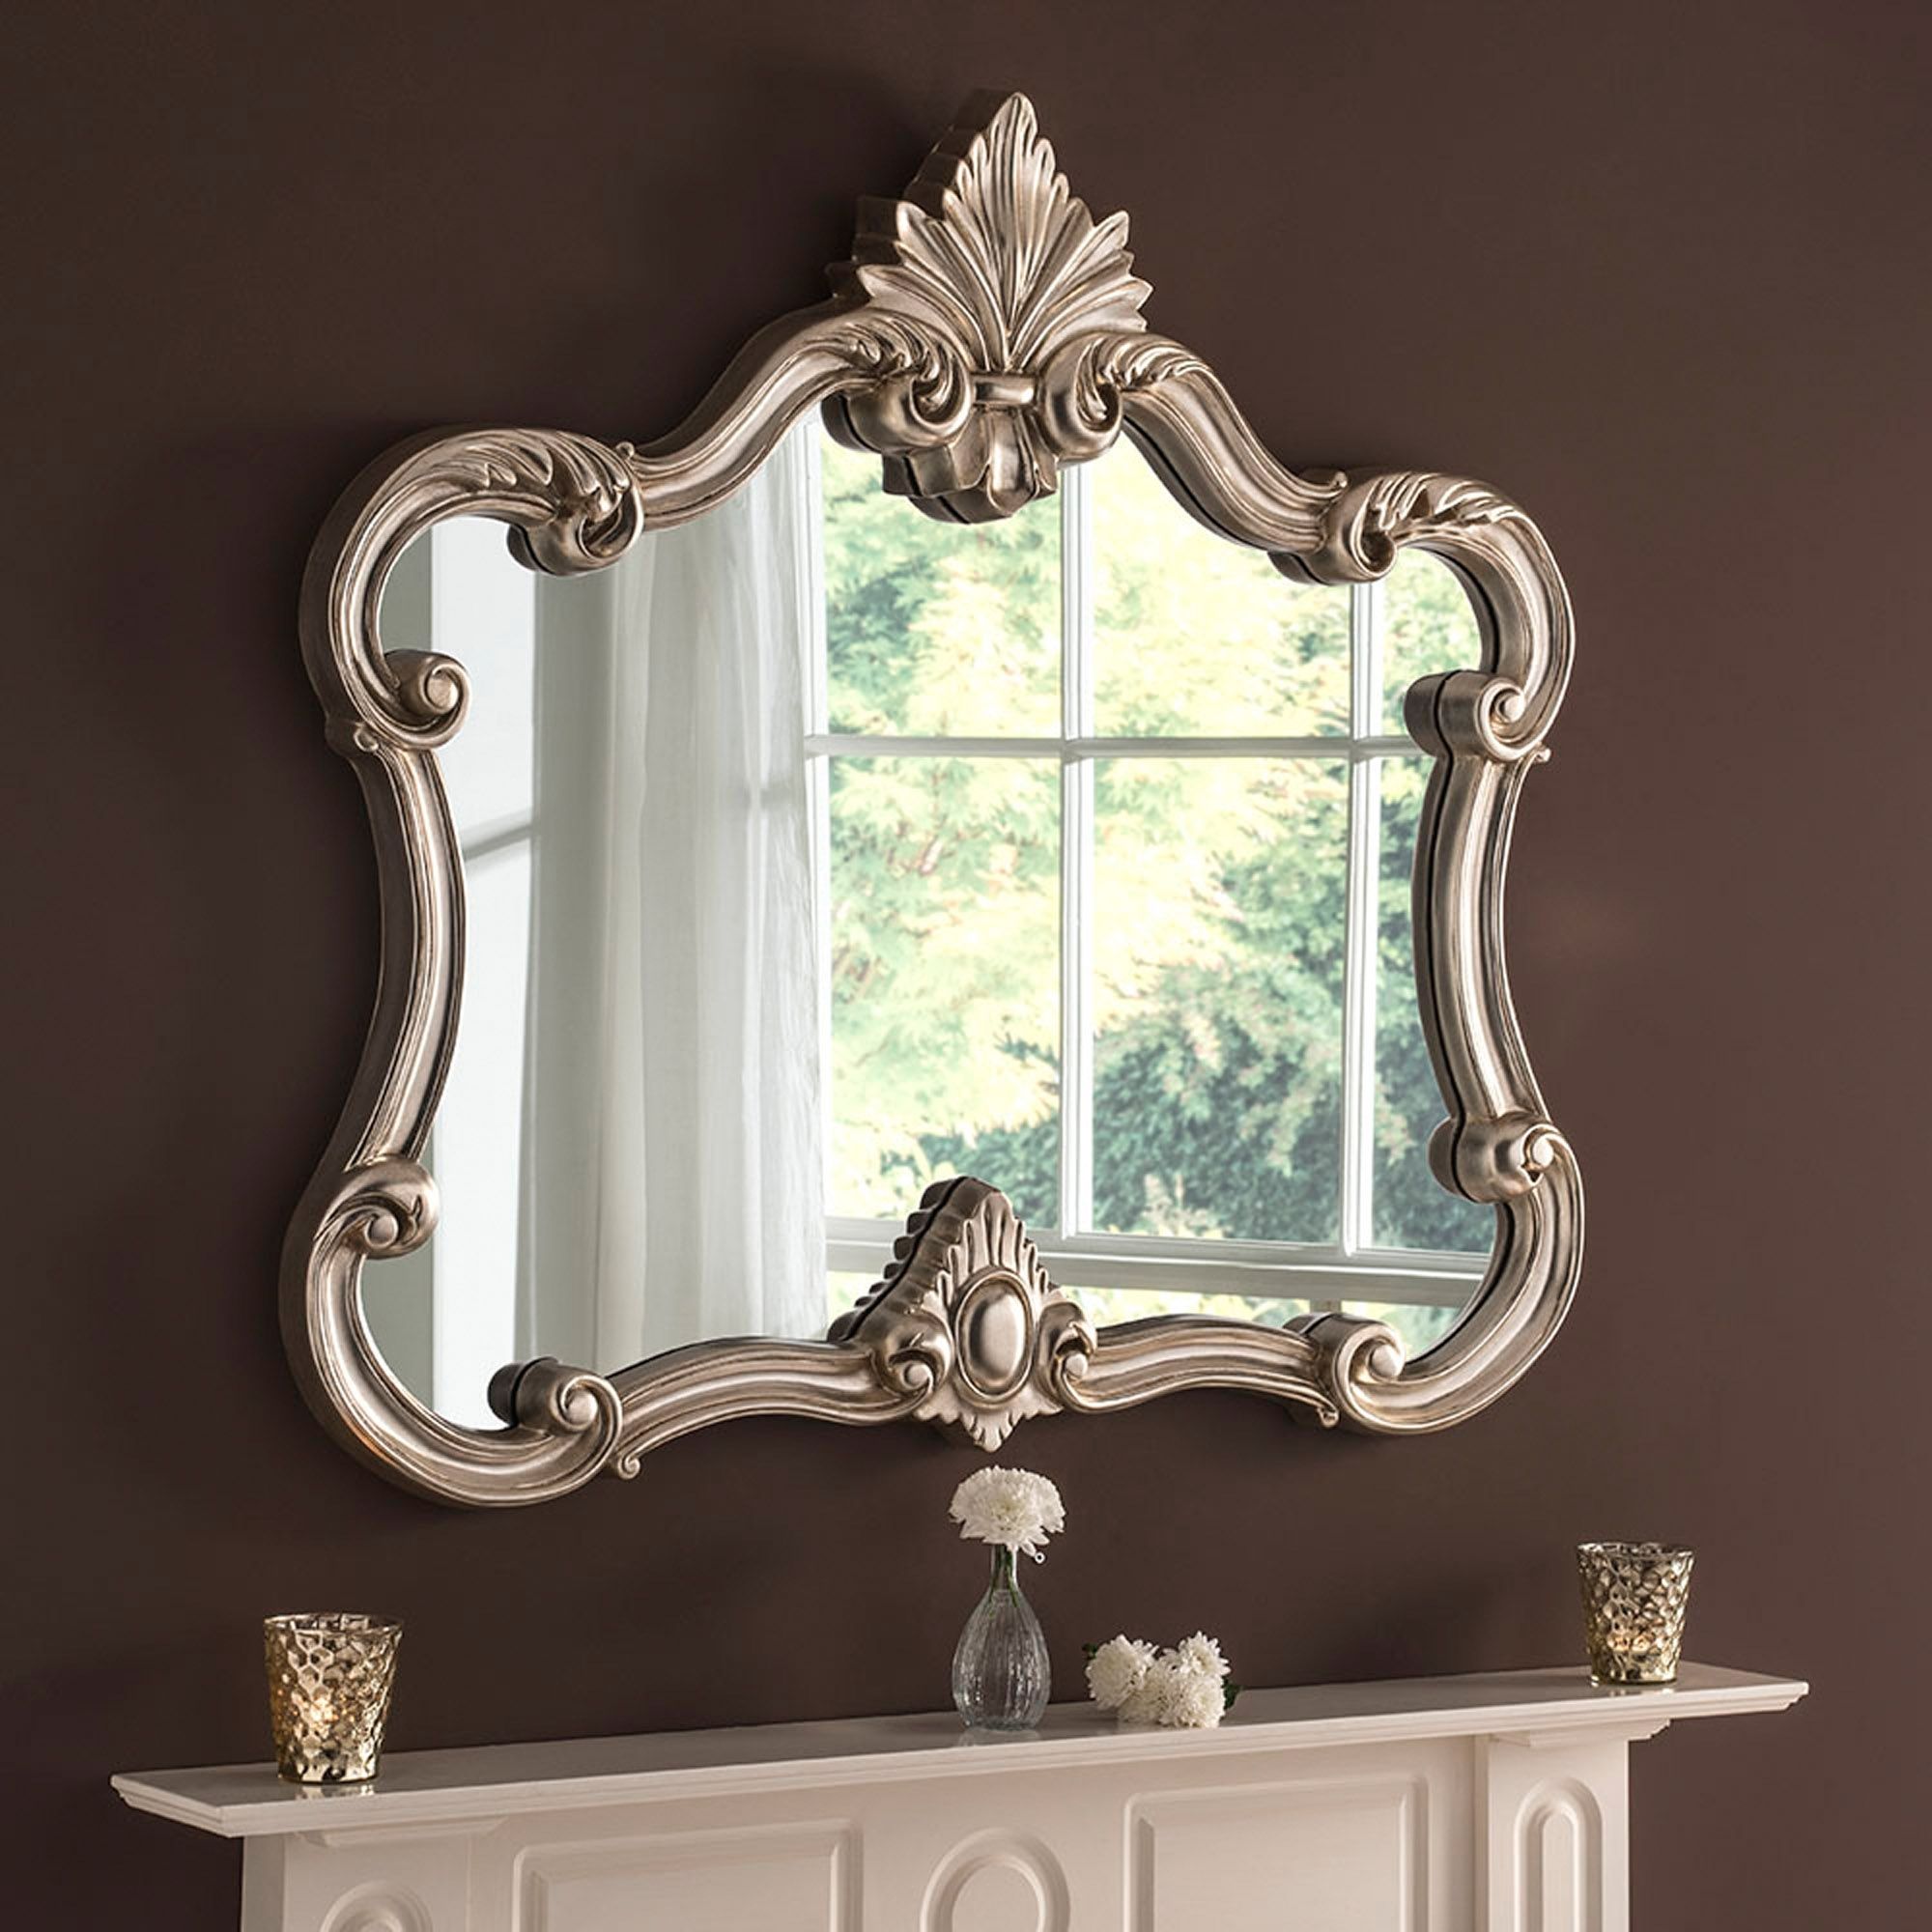 Antique French Style Silver Decorative Mirror In Booth Reclaimed Wall Mirrors Accent (View 1 of 15)